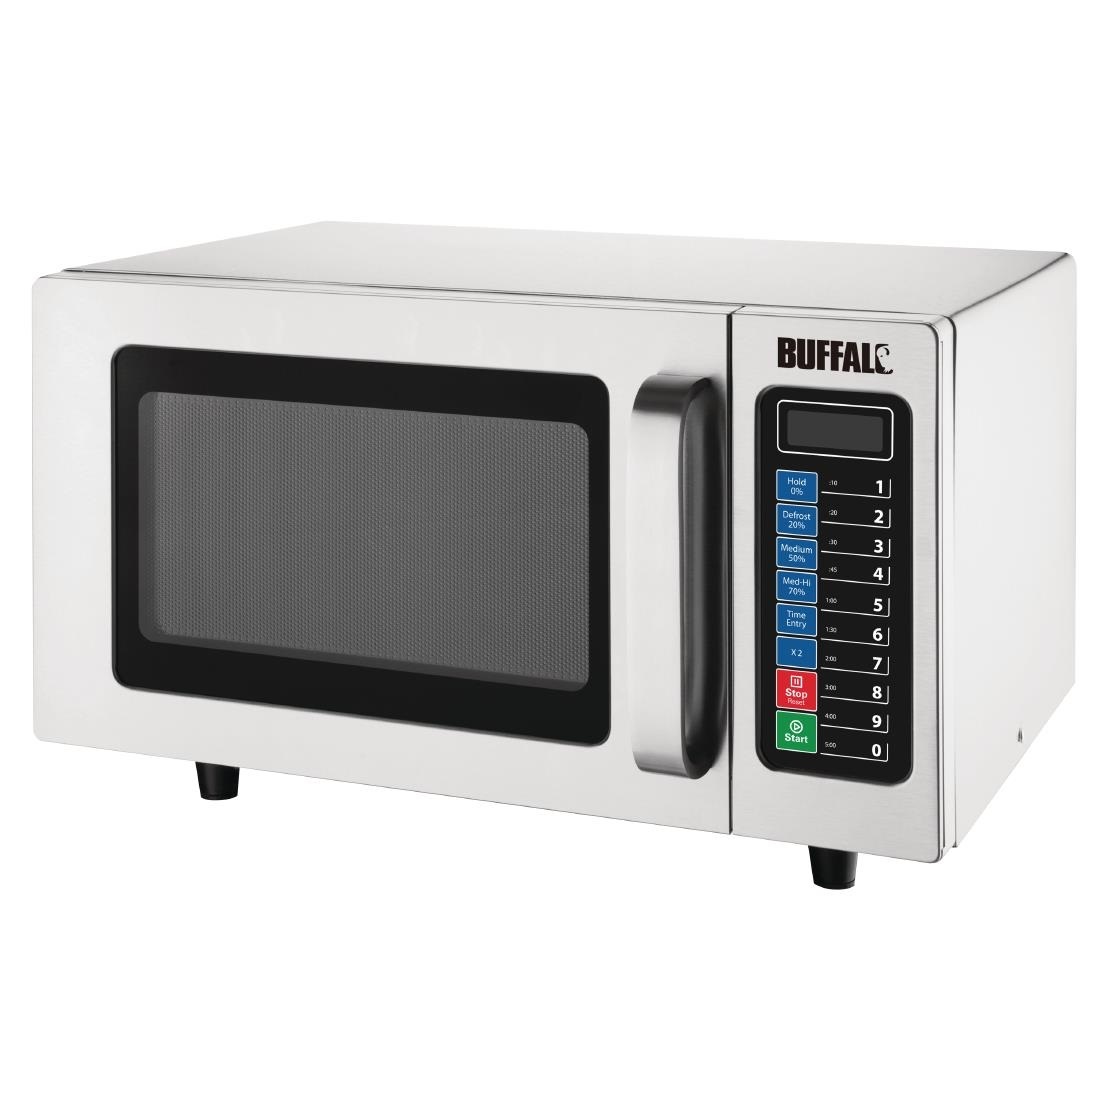 Buffalo Programmable Commercial Microwave 1000W (FB862)